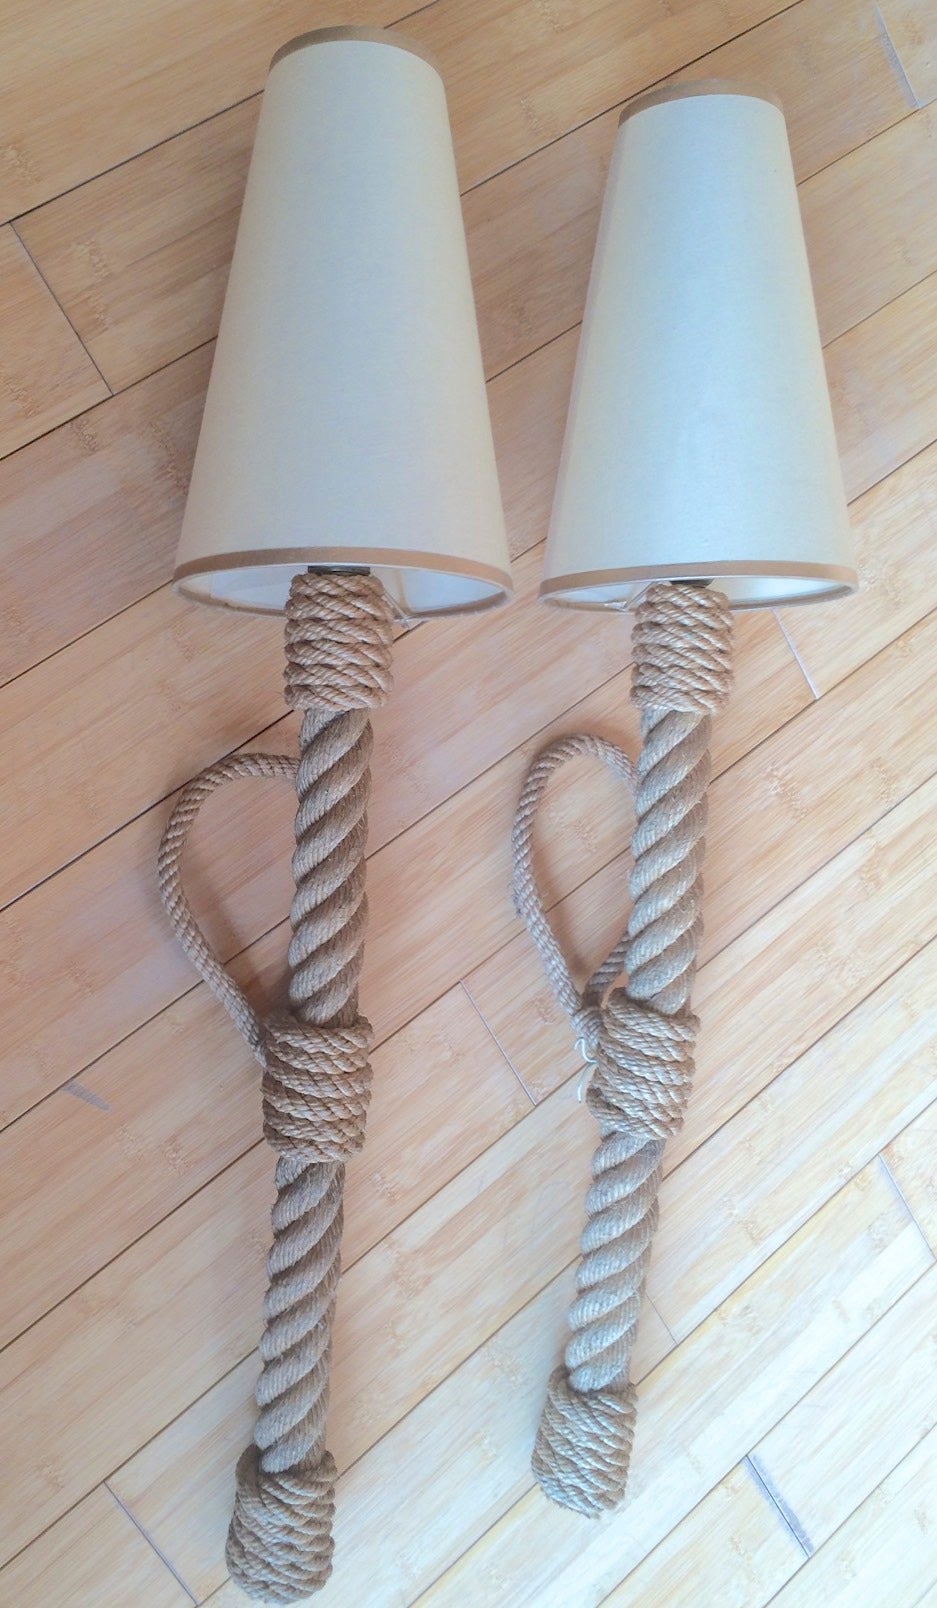 Riviera Audoux Minet Pair of Wall-Mounted Rope Torches 4